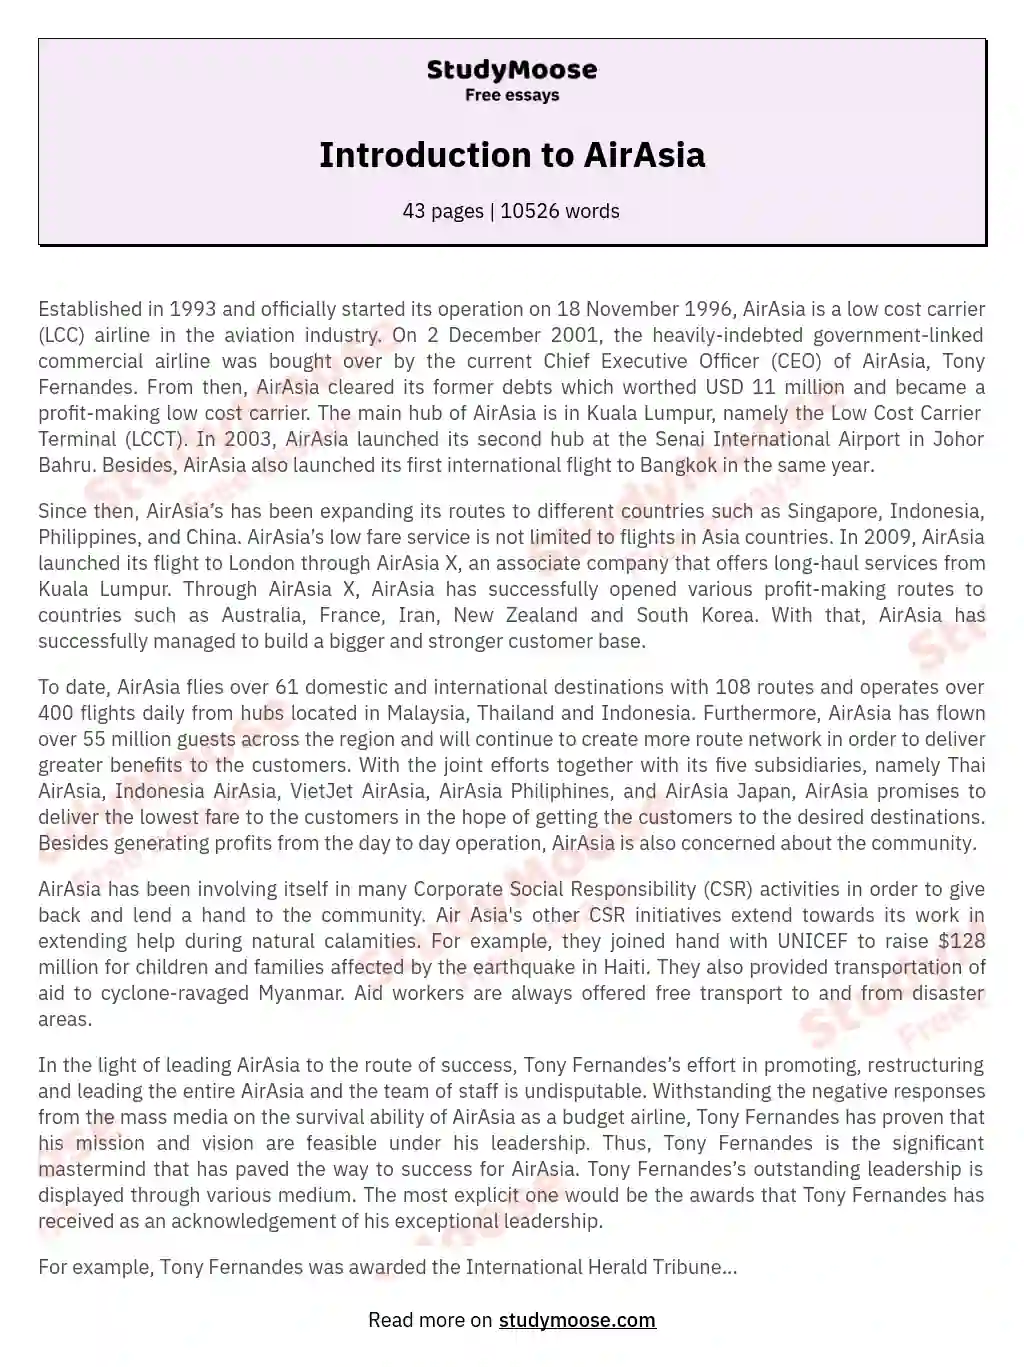 Introduction to AirAsia essay